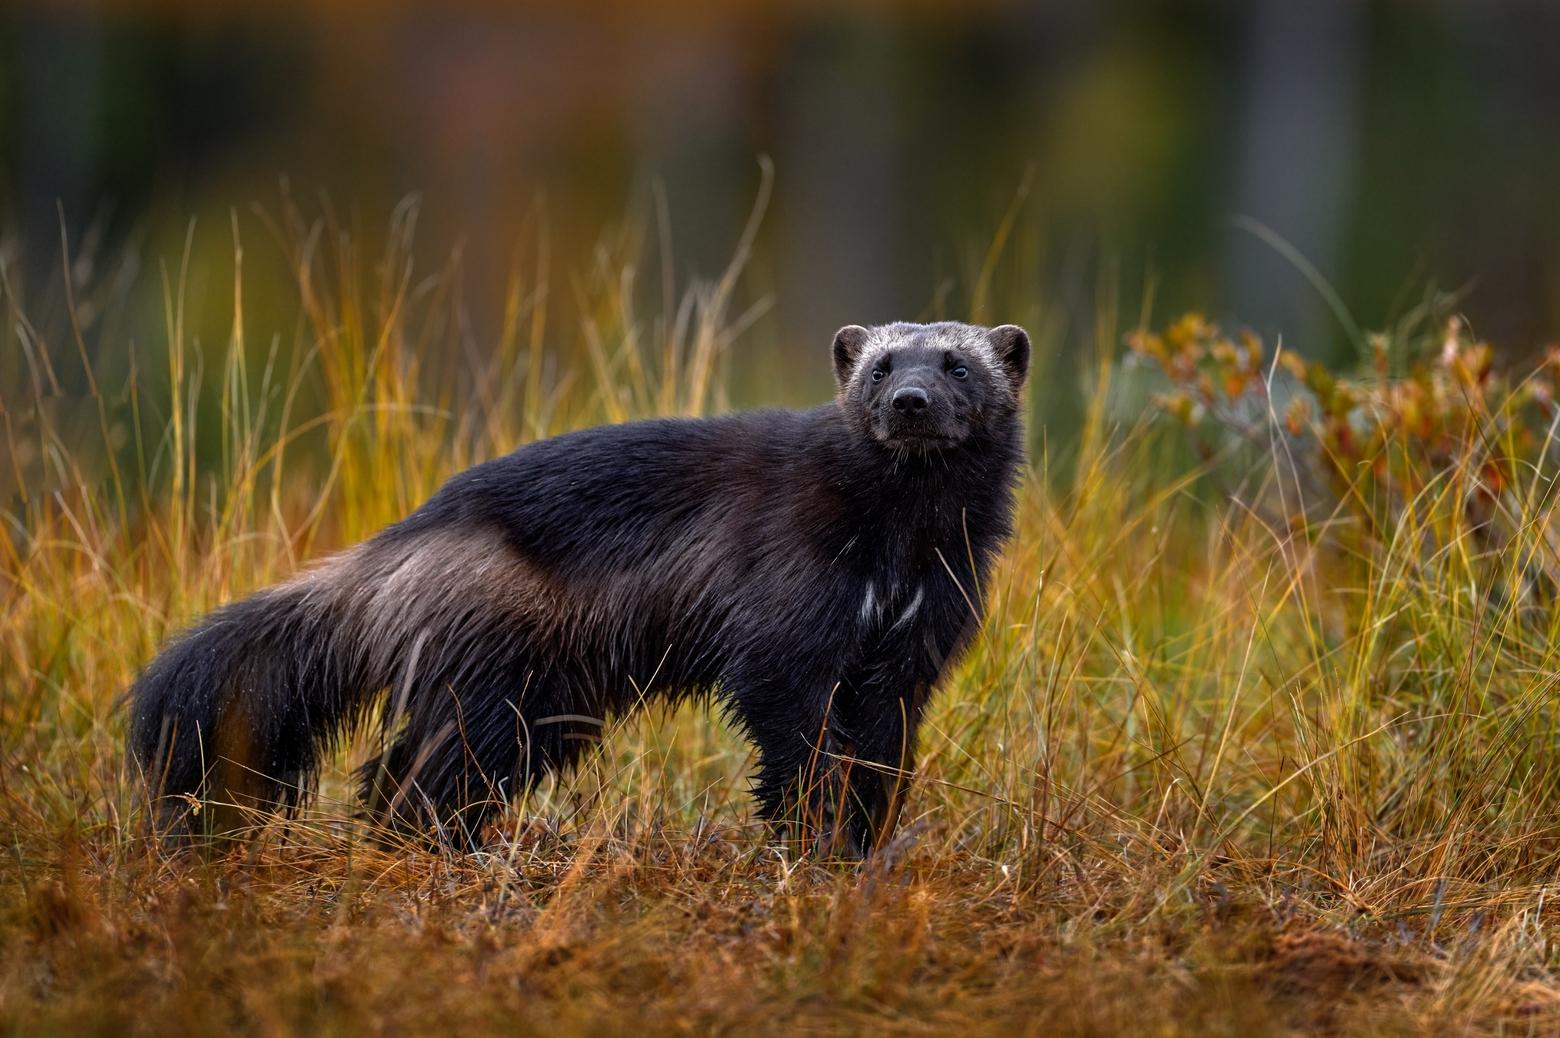 Wolverines have increased in number and distribution in the second half of the 20th century, but nailing down exact numbers is difficult. They have territories that are hundreds of square miles, and are extremely elusive. Photo by Ondrej Prosicky